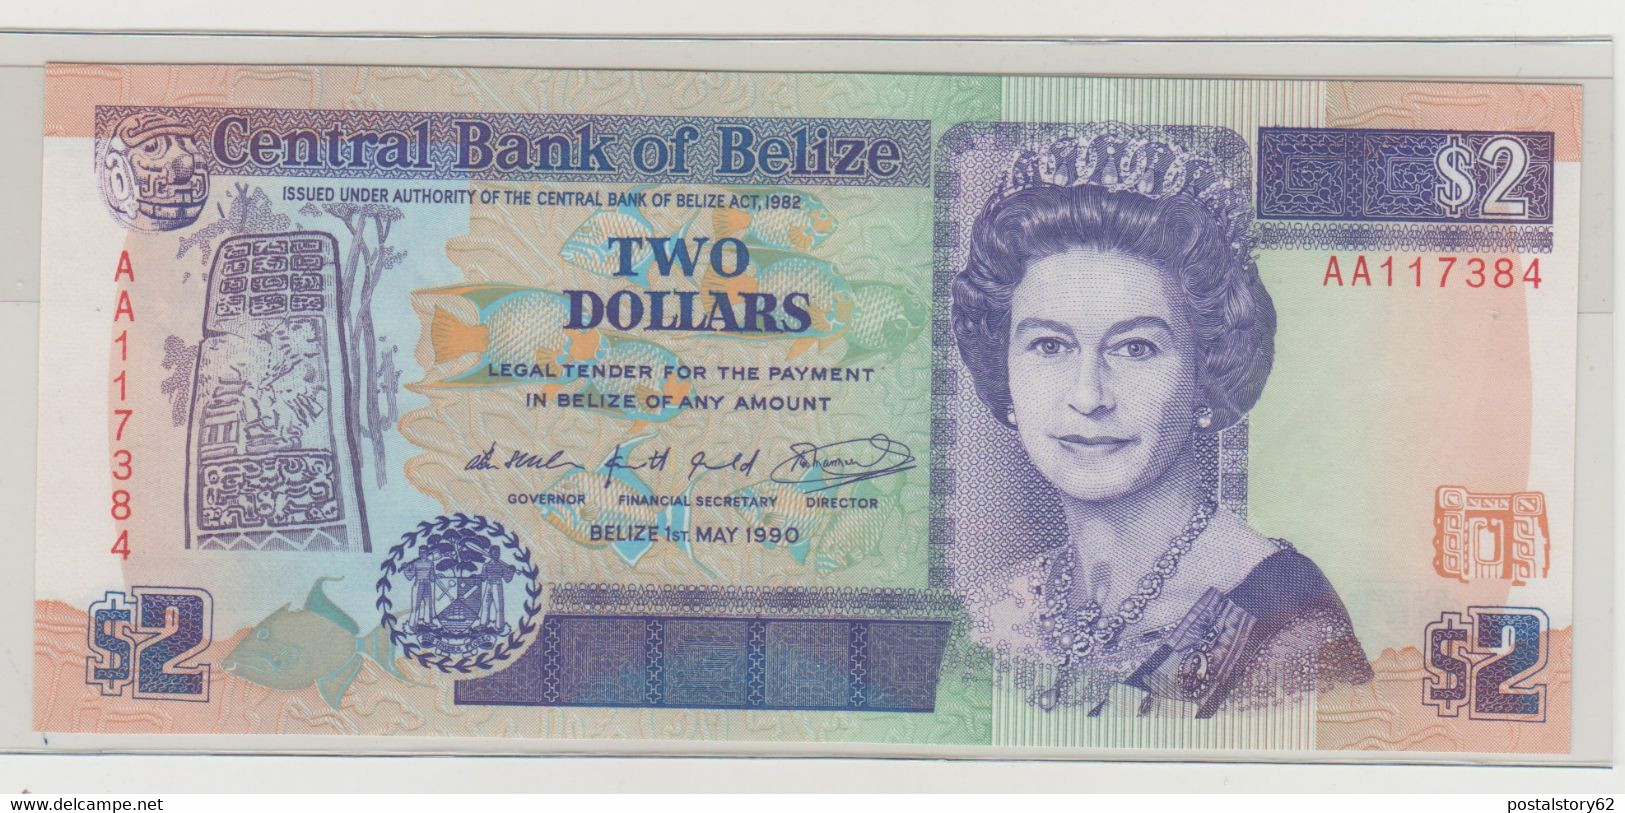 Central Bank Of Belize, Banconota Da Two Dollars  01- 05 - 1990 Pick 52 A  Unc./ Fds - Belize